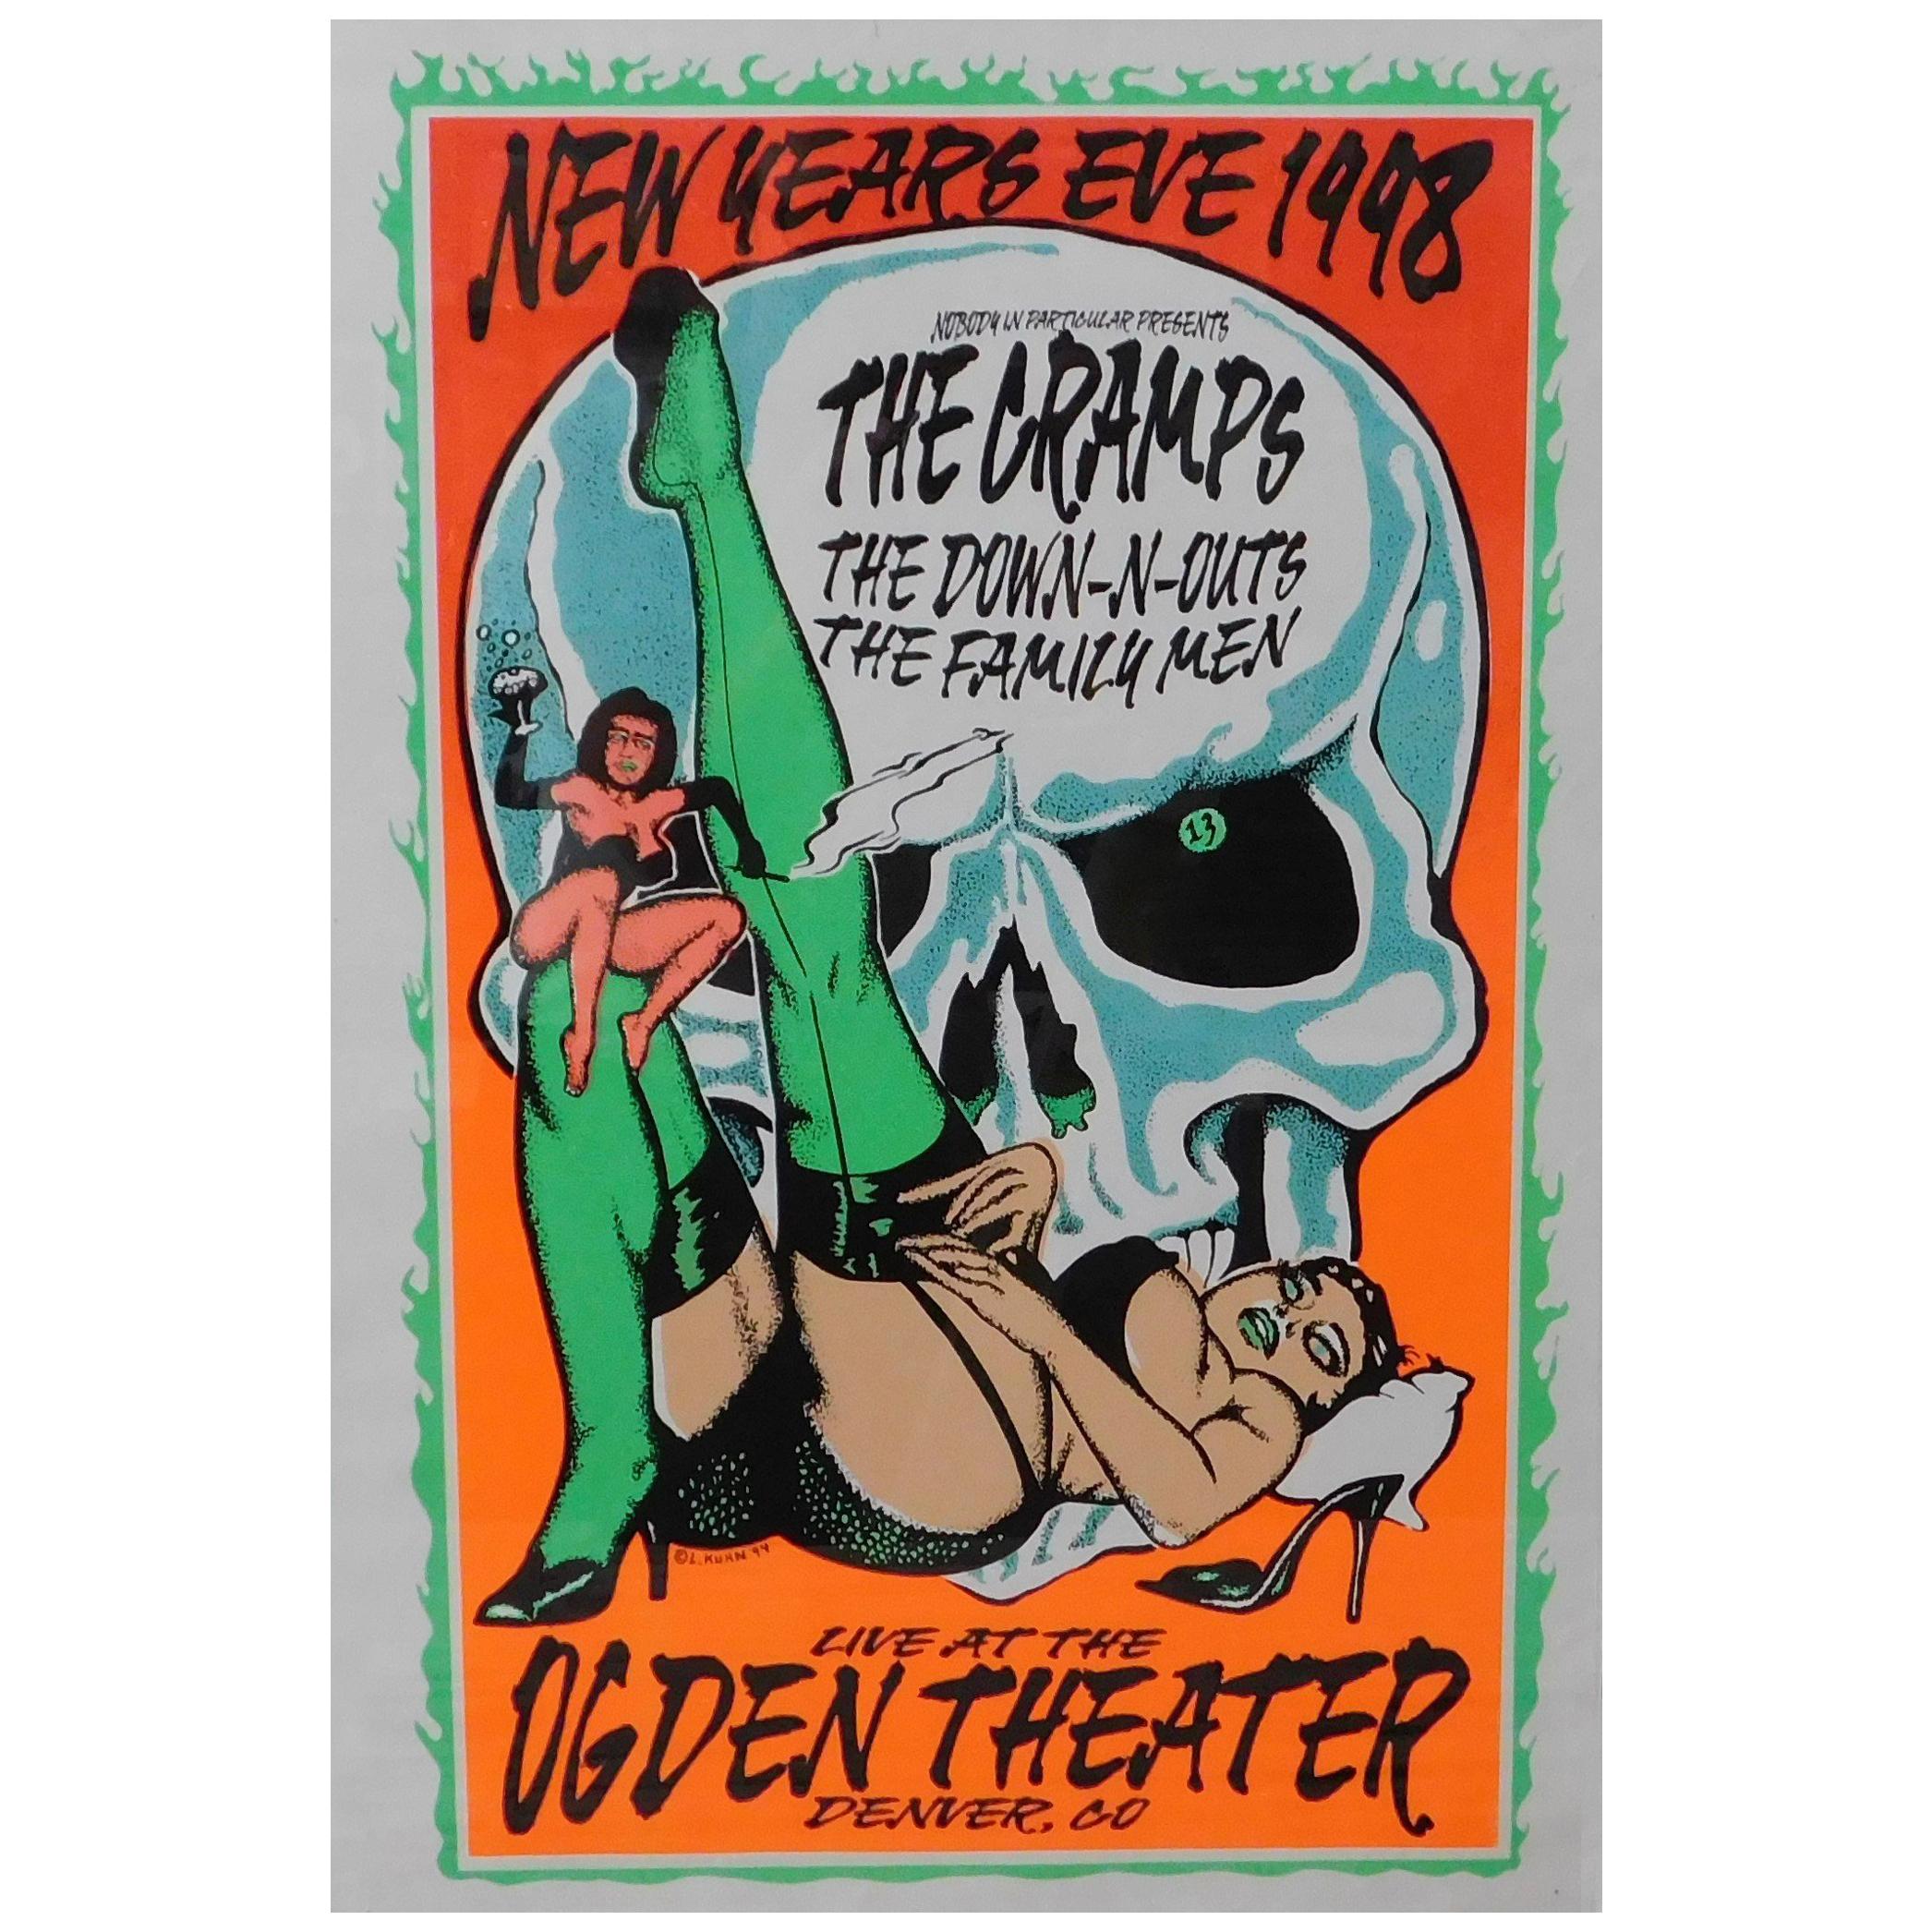 The Cramps Live New Years Eve 1998 Music Poster